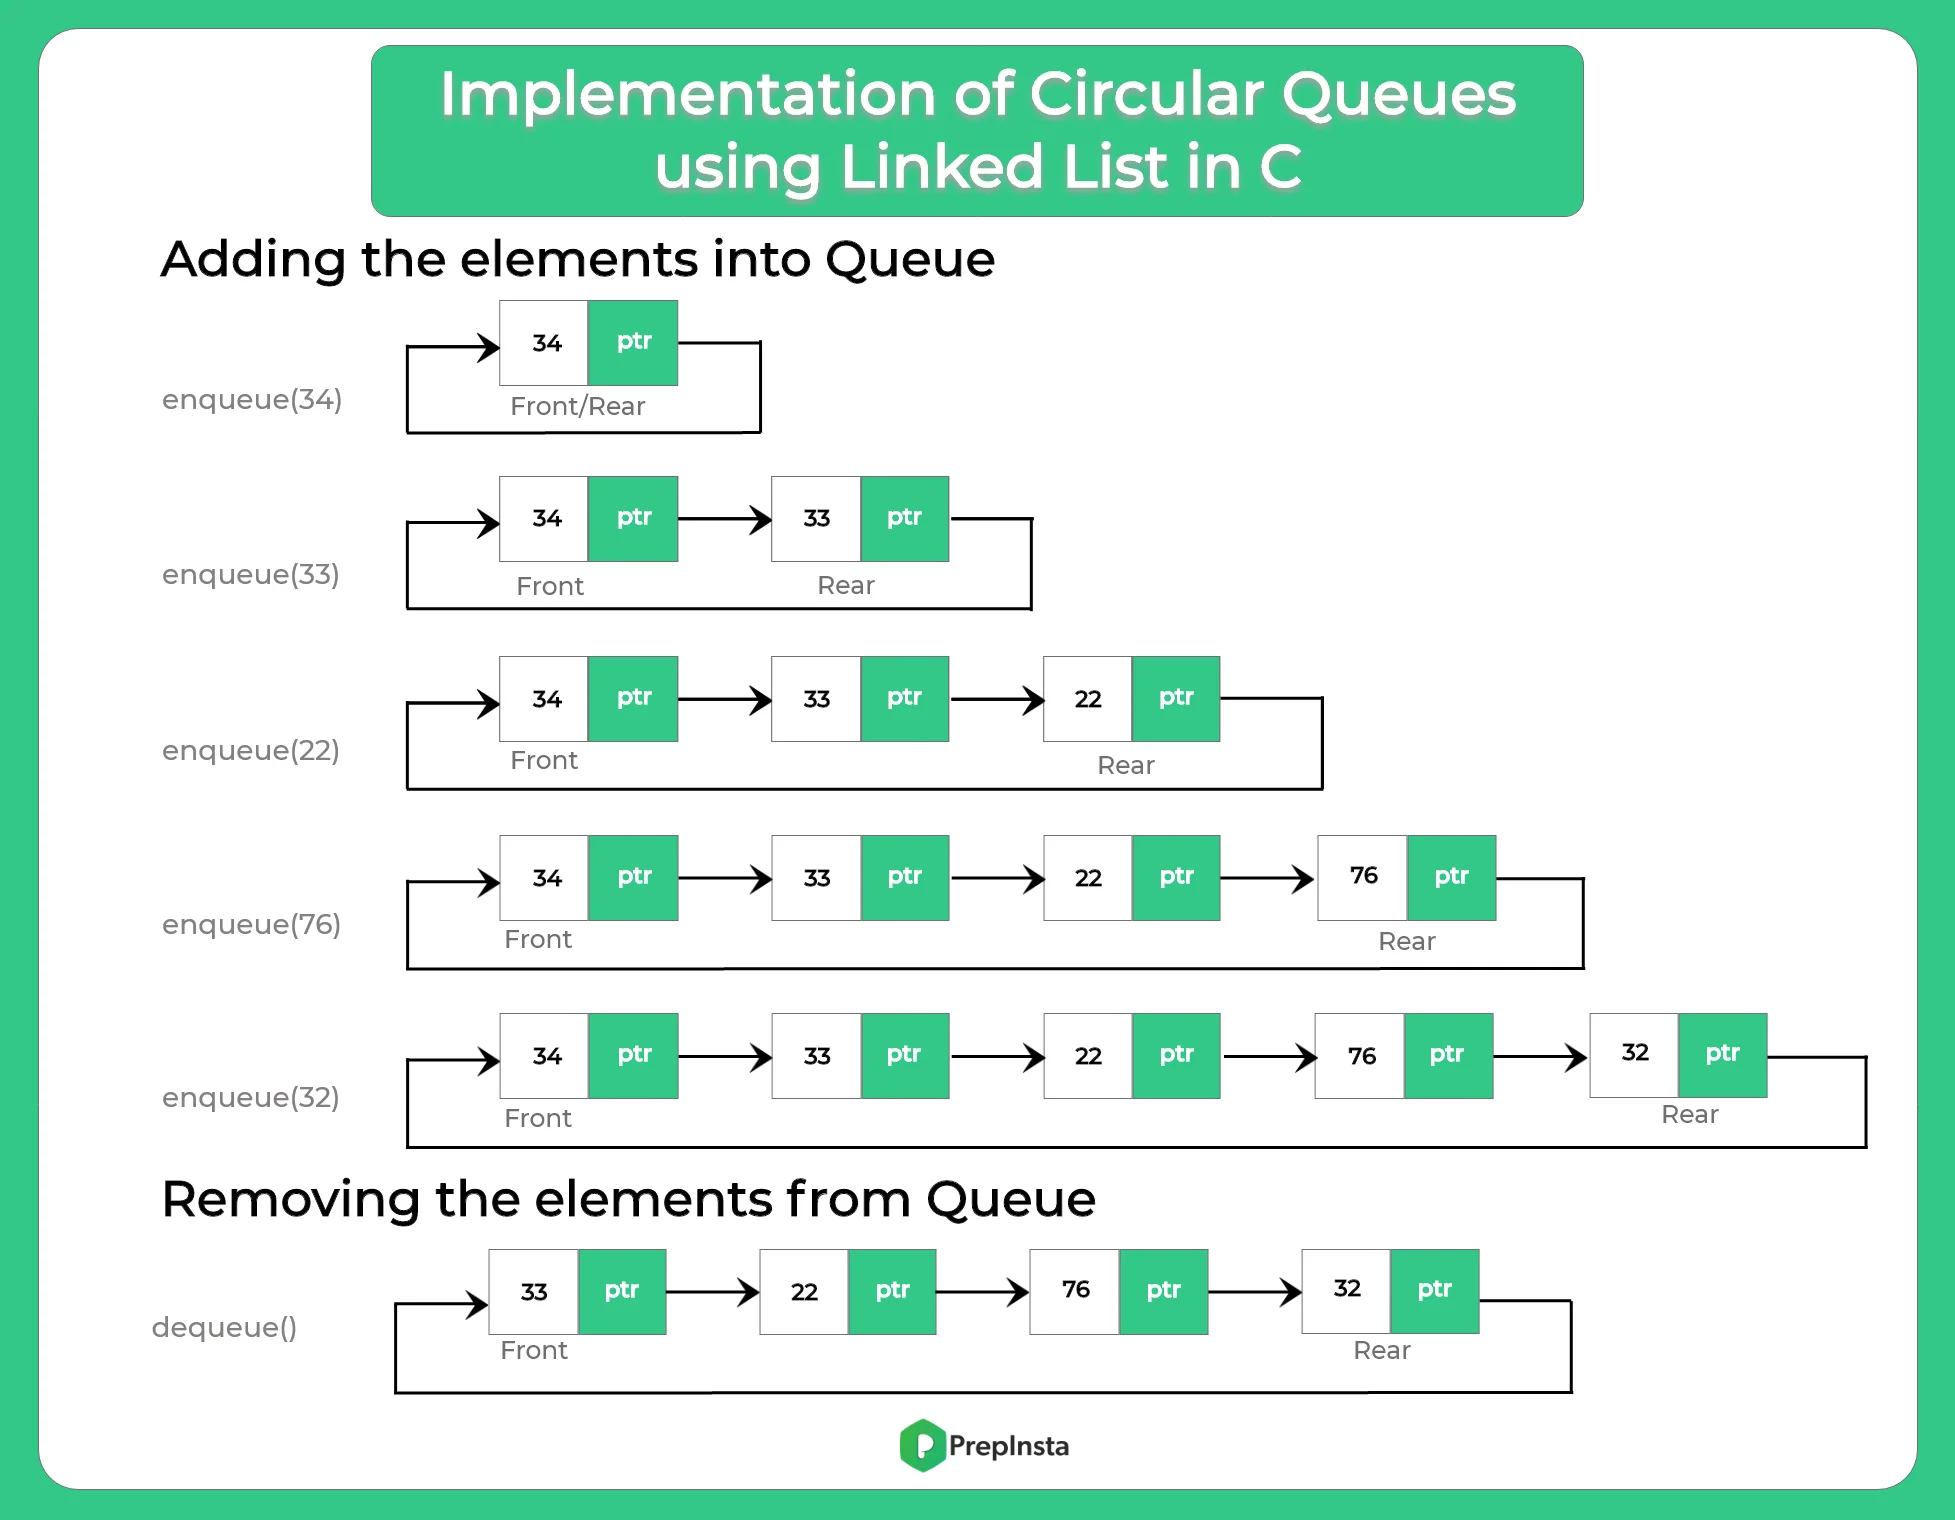 Implementation of Circular Queues using Linked List in C